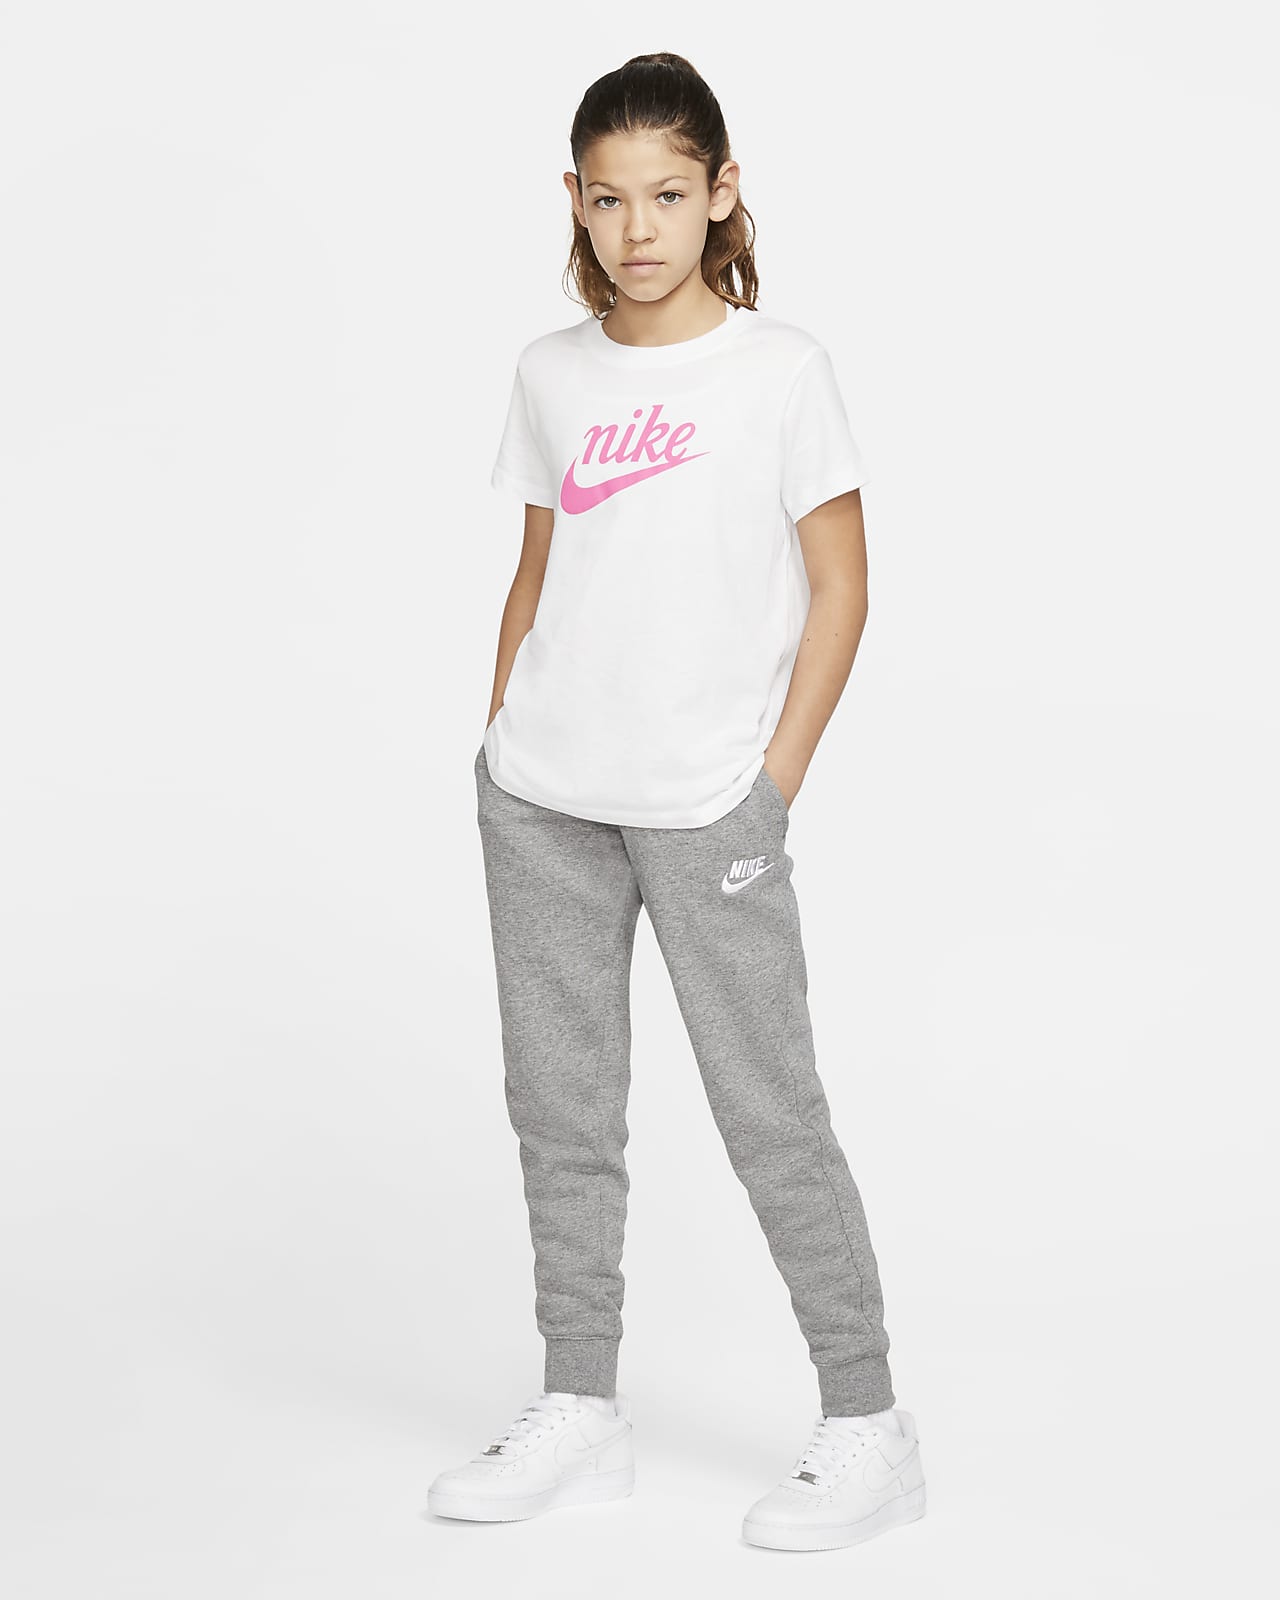 Buy Nike Girl's Trousers (844965-065_Dk Grey Heather/White_X-Small) at  Amazon.in